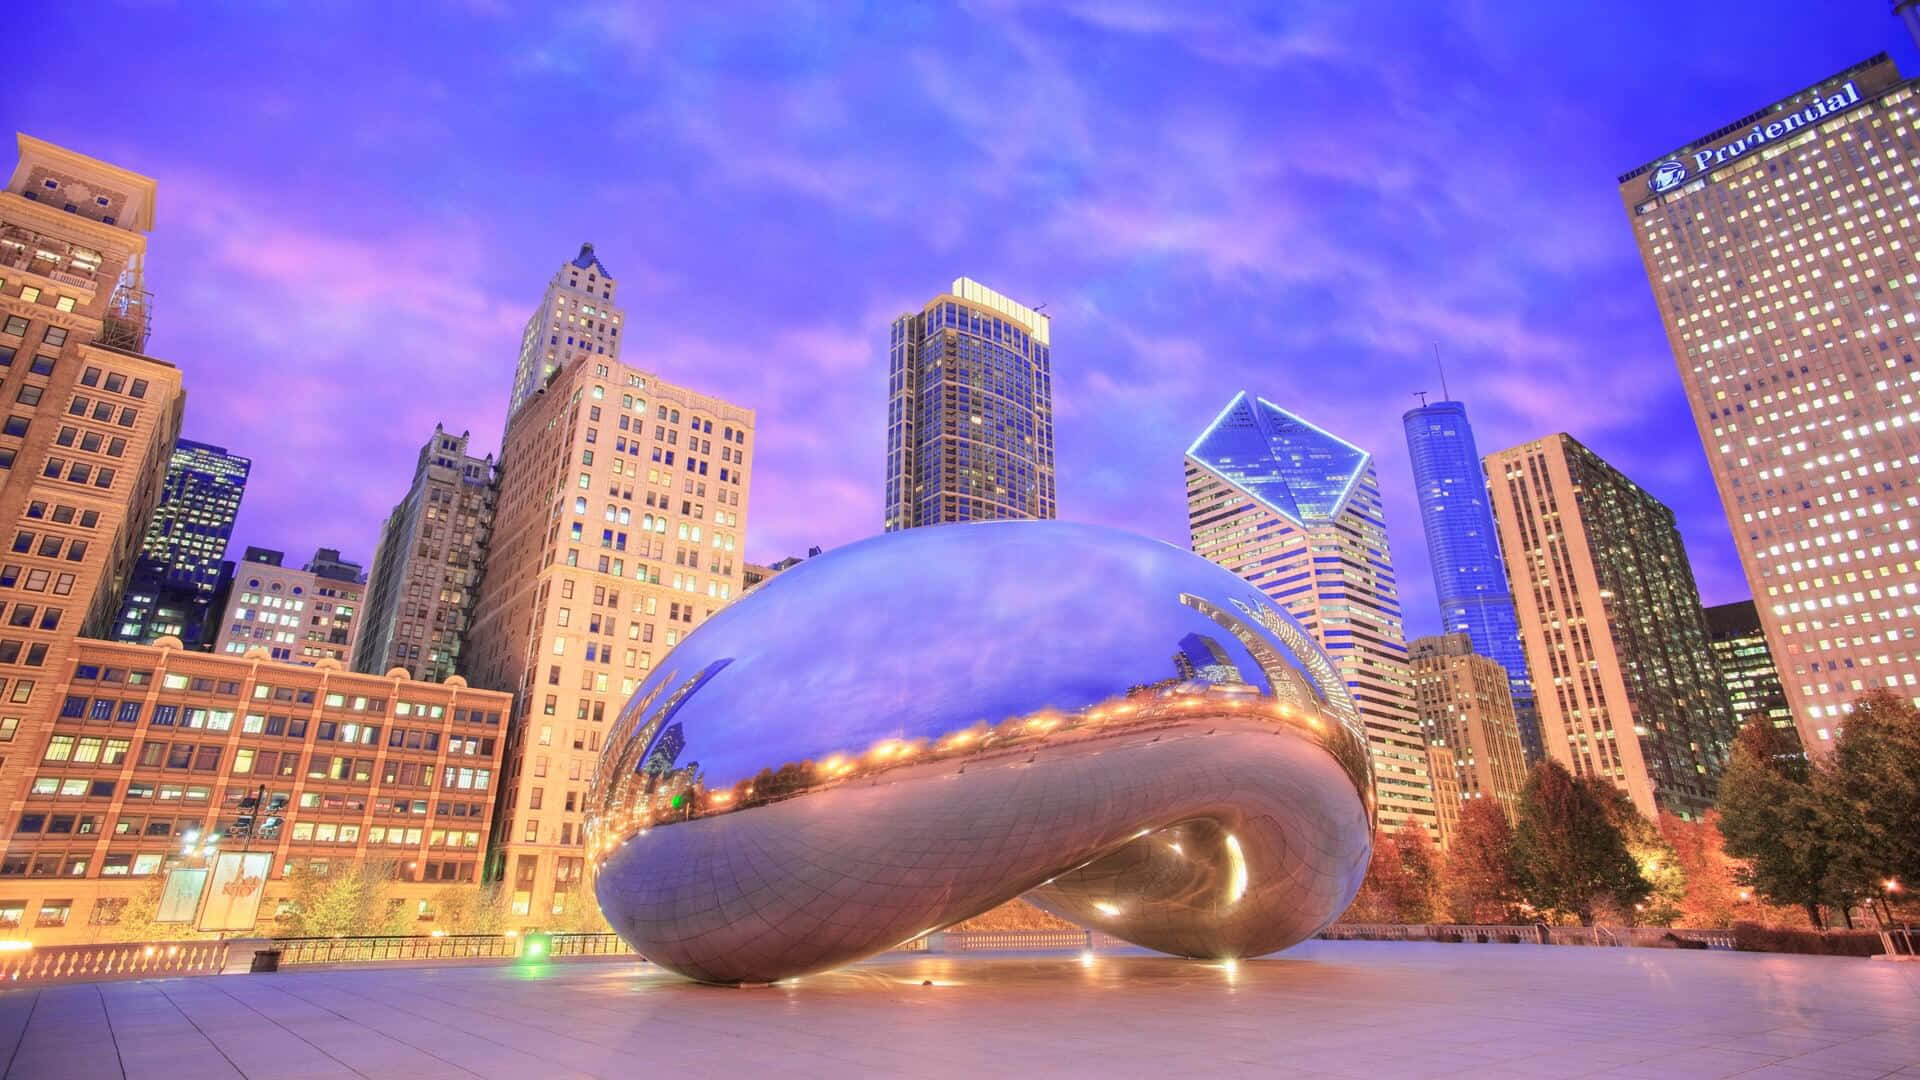 Cloud Gate In Chicago With City Lights Wallpaper